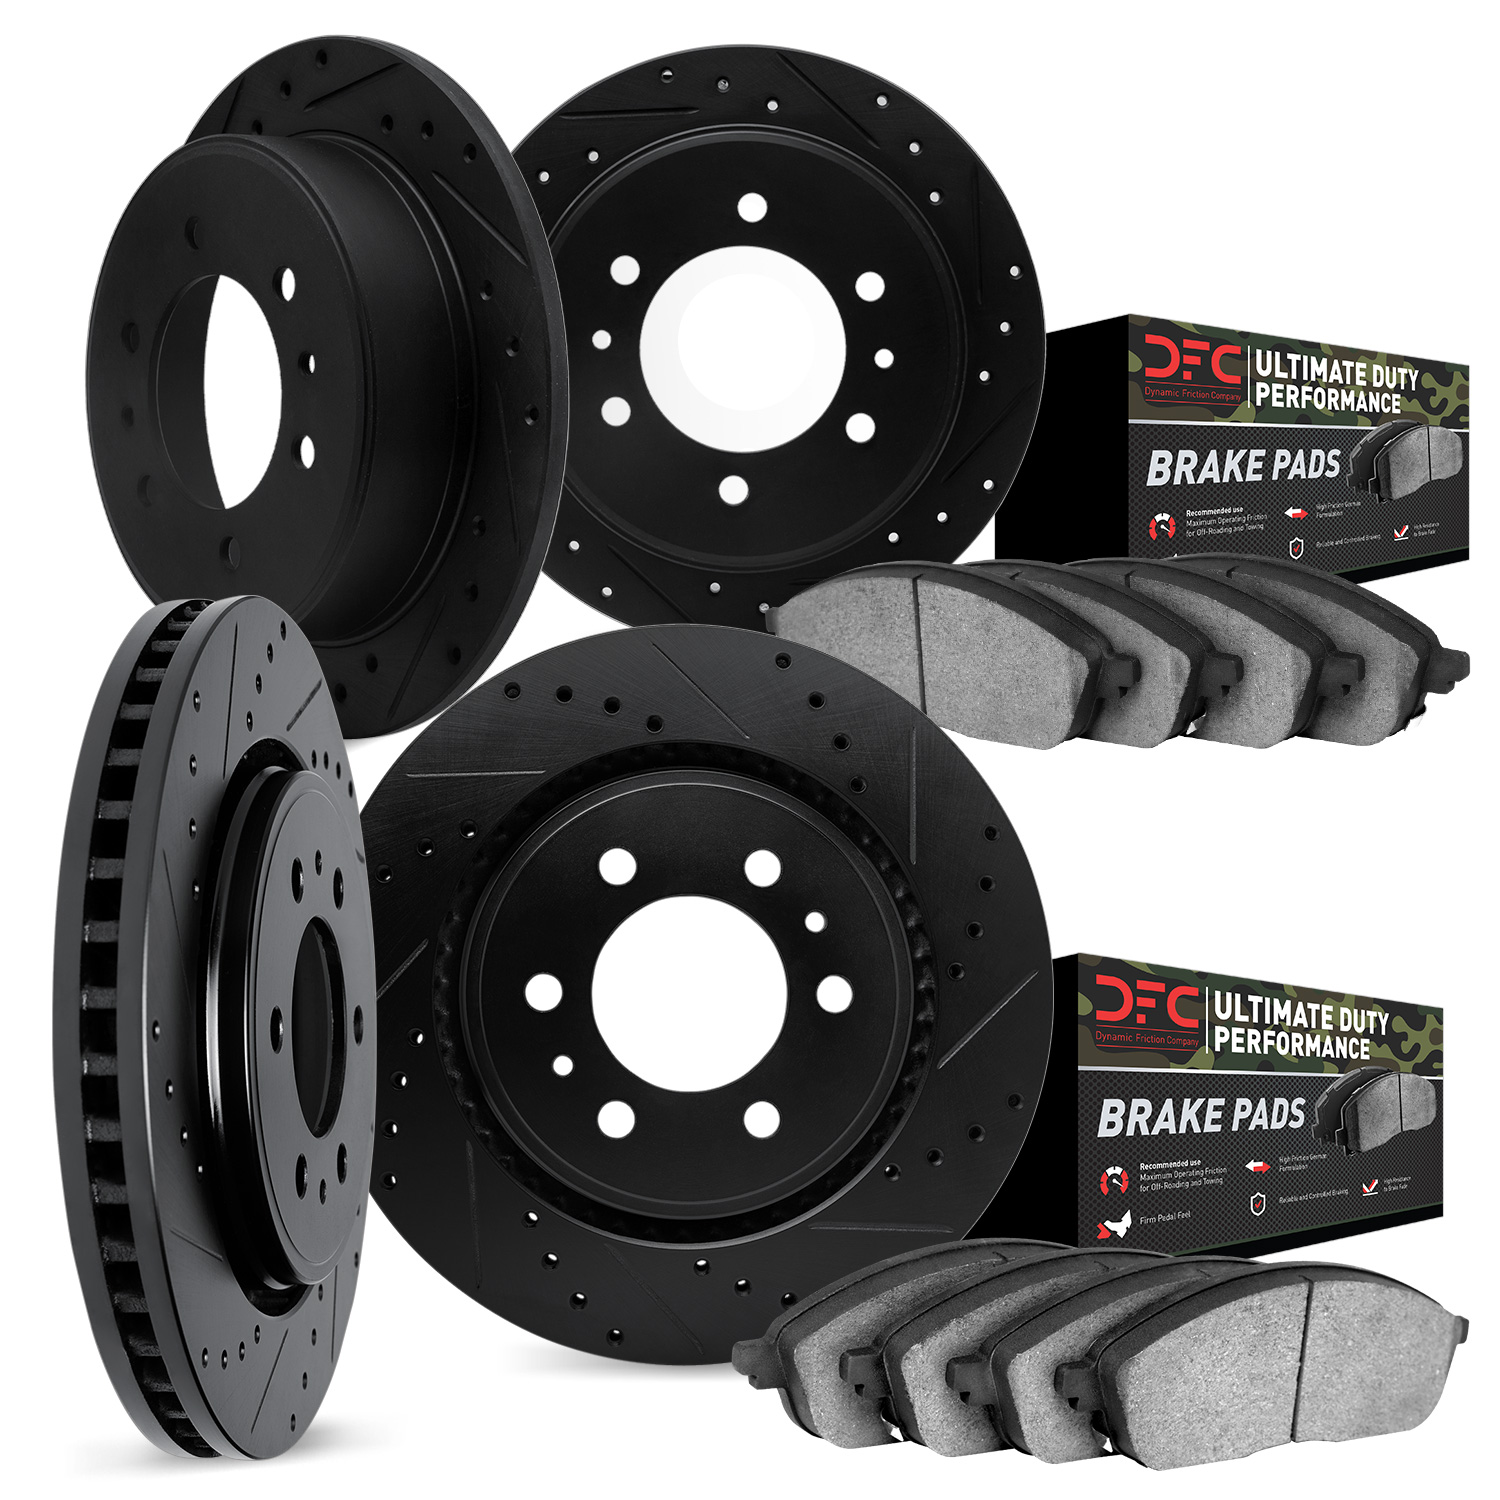 8404-67001 Drilled/Slotted Brake Rotors with Ultimate-Duty Brake Pads Kit [Black], 2004-2005 Infiniti/Nissan, Position: Front an